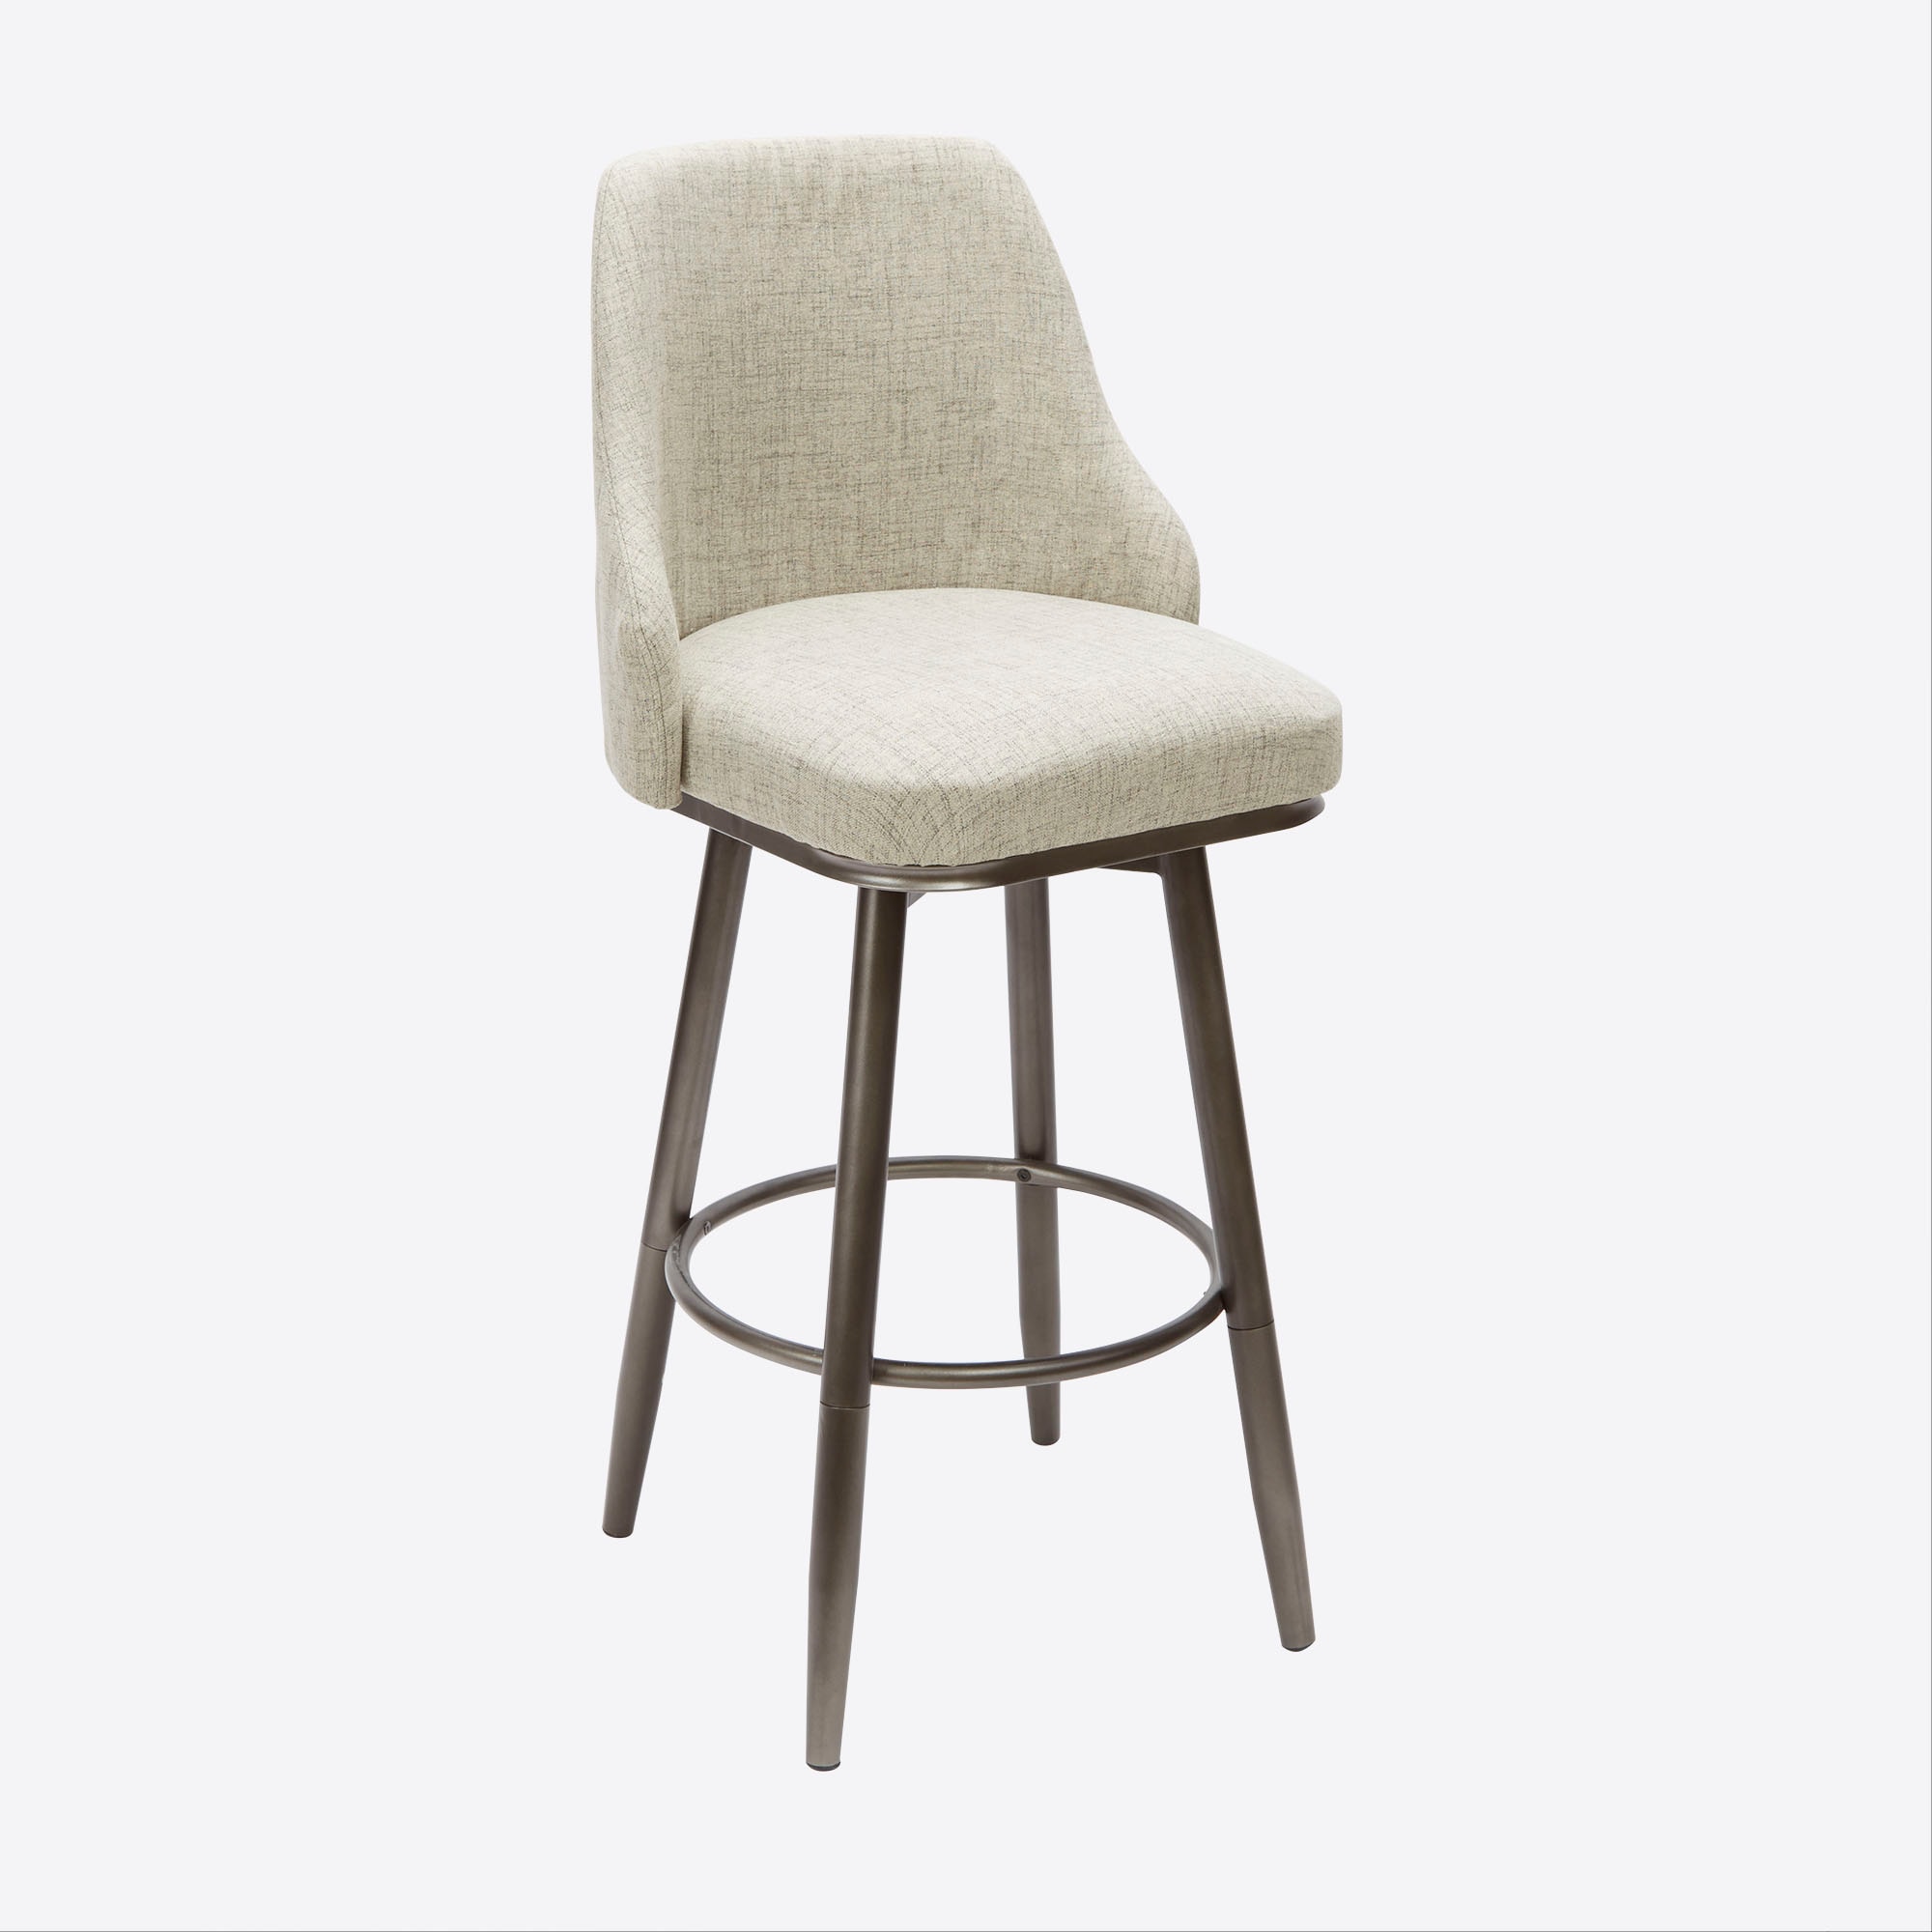 Metal Adjustable Height Upholstered, How To Fix Adjustable Bar Stools